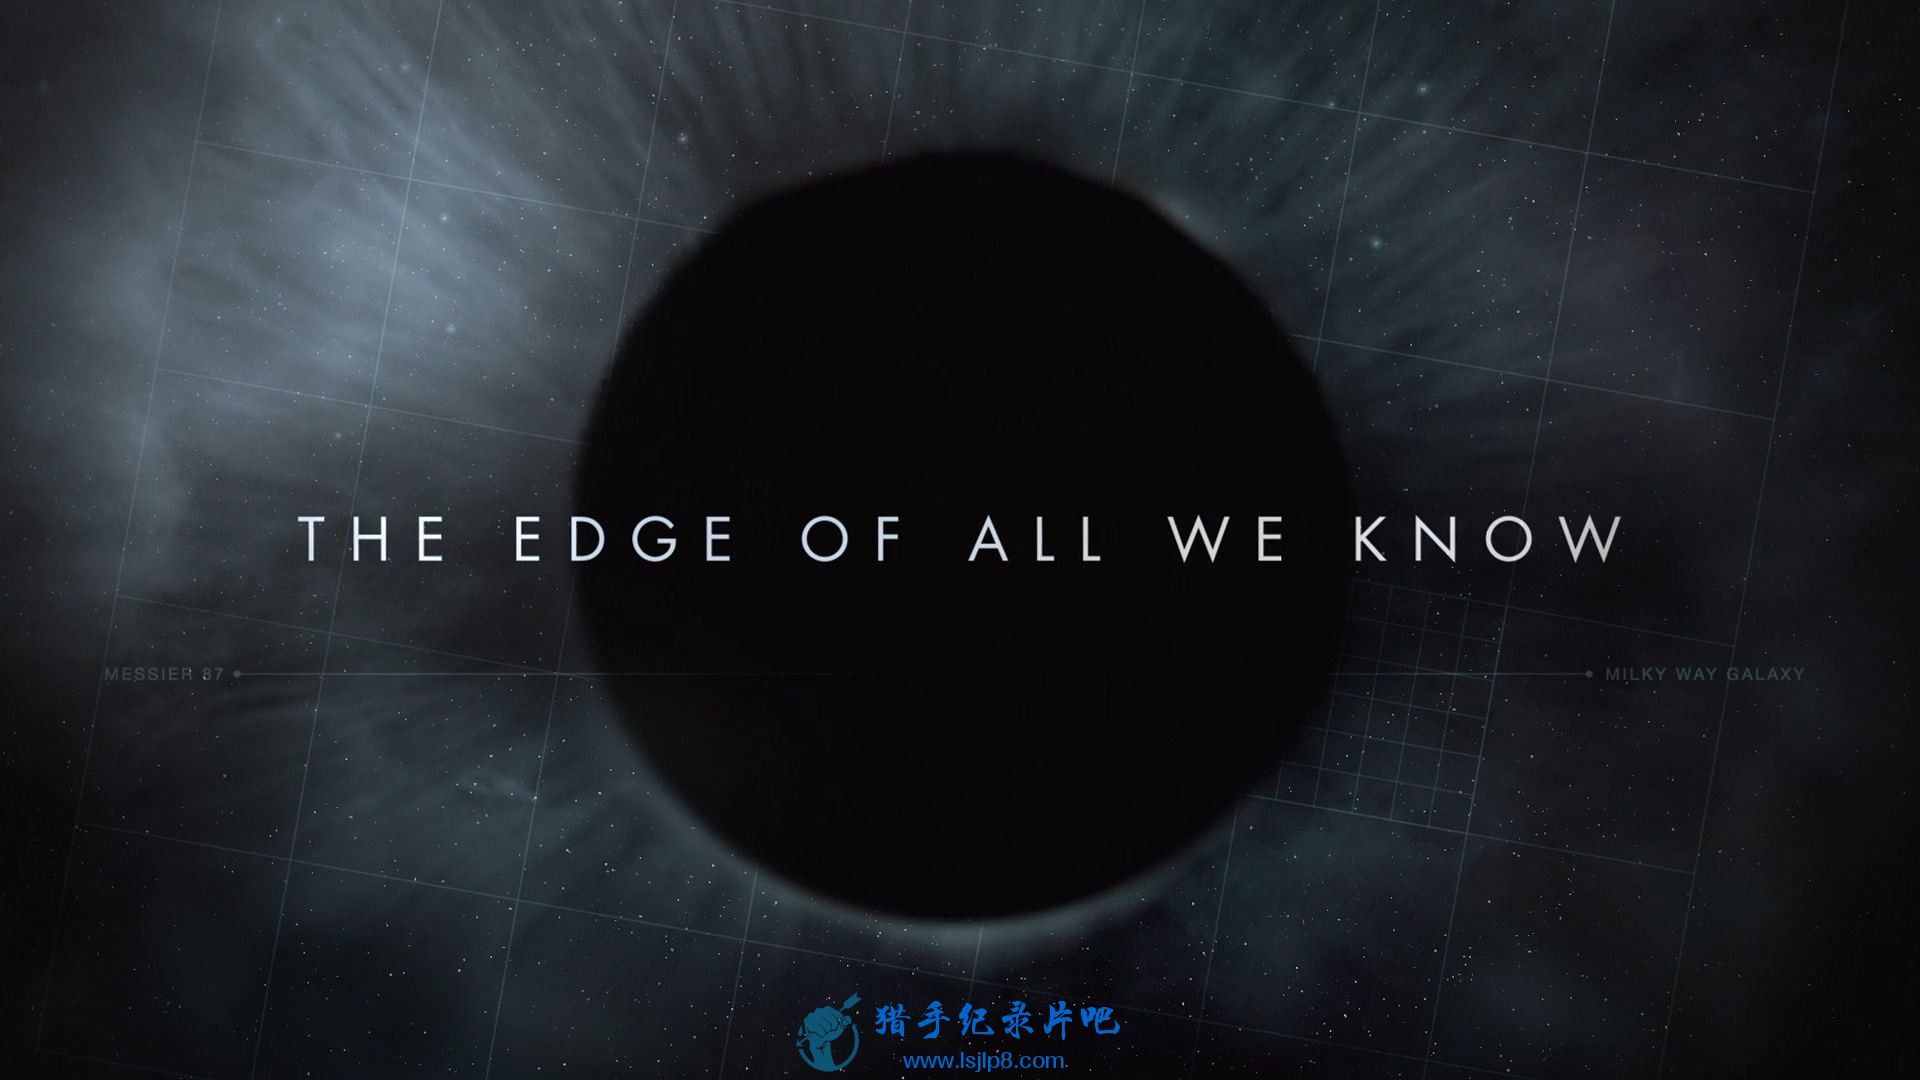 Black.Holes.the.Edge.of.All.We.Know.2021.1080p.NF.WEB-DL.DDP5.1.Atmos.x264-T4H.jpg